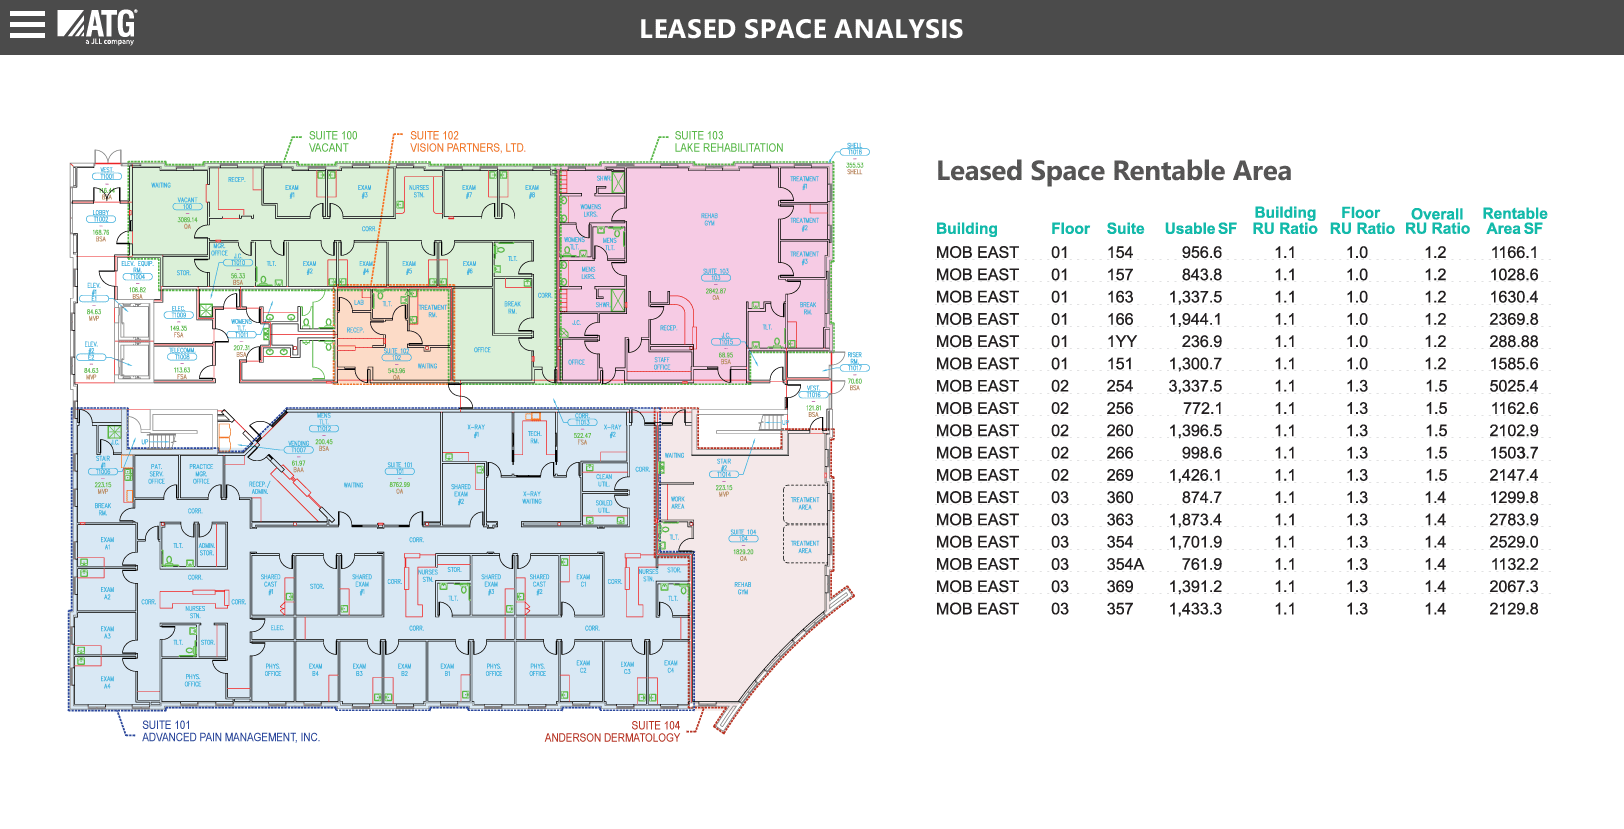 Leased Space Reporting